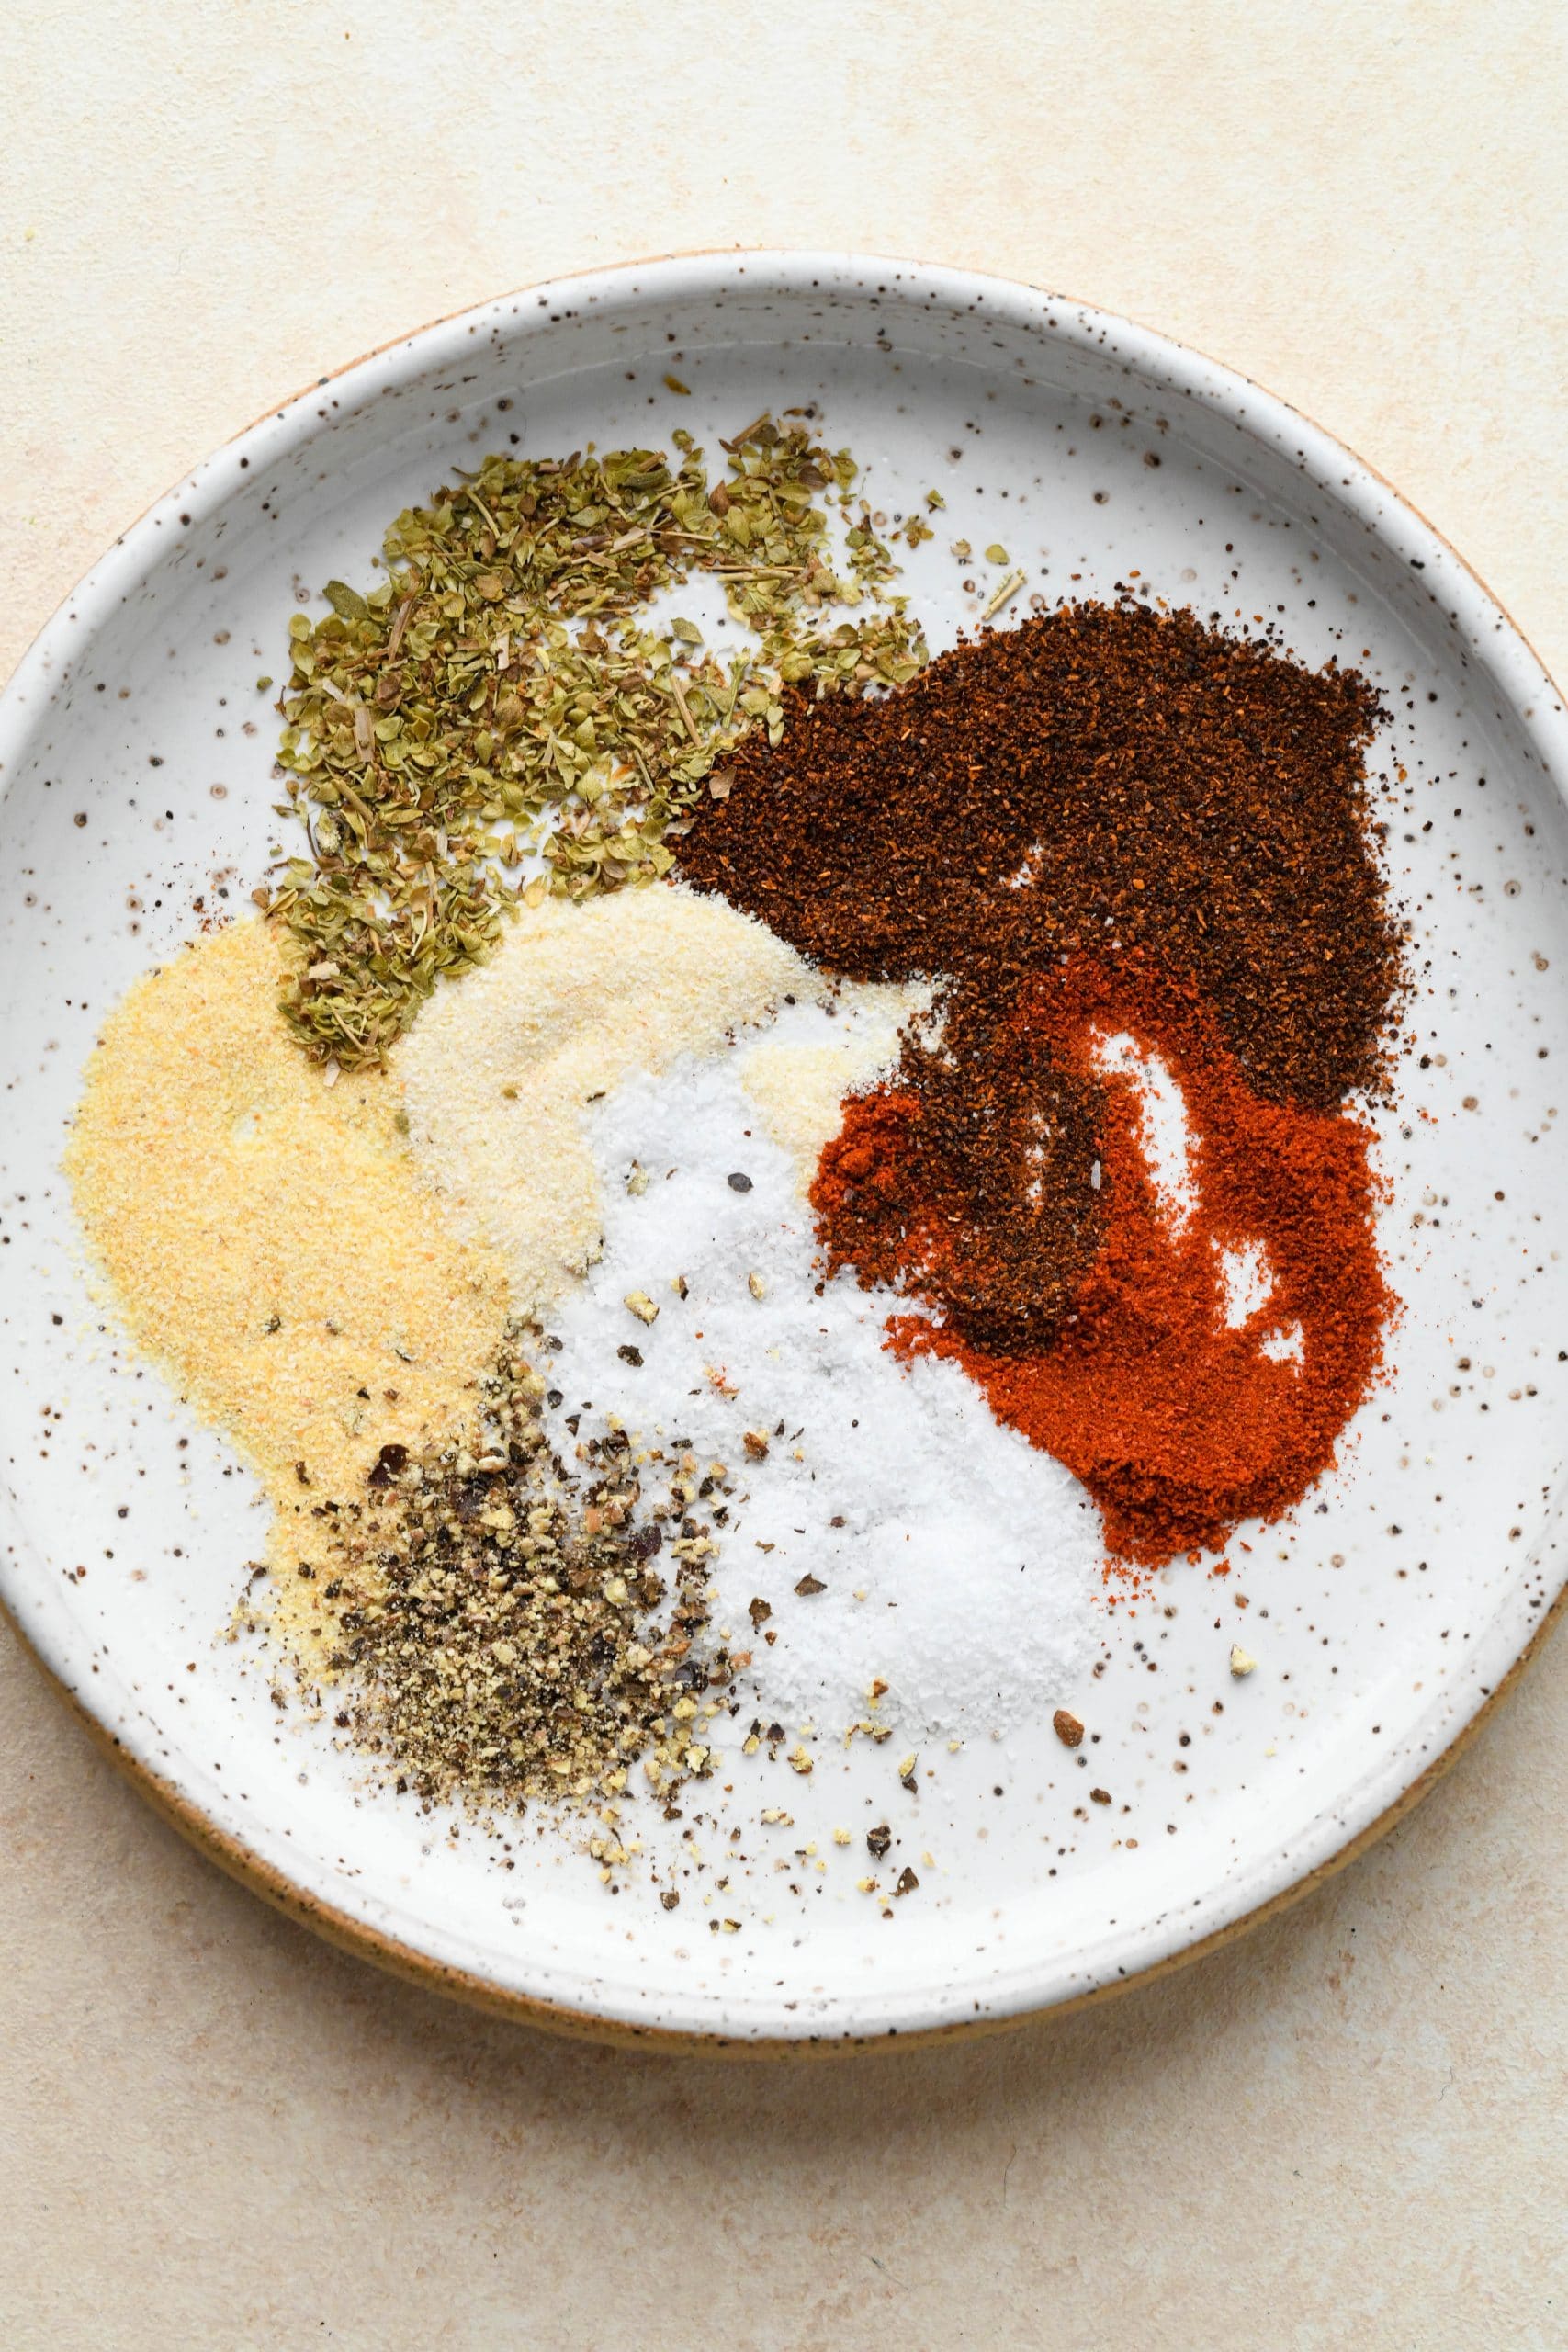 Blackening spices on a small white speckled plate.